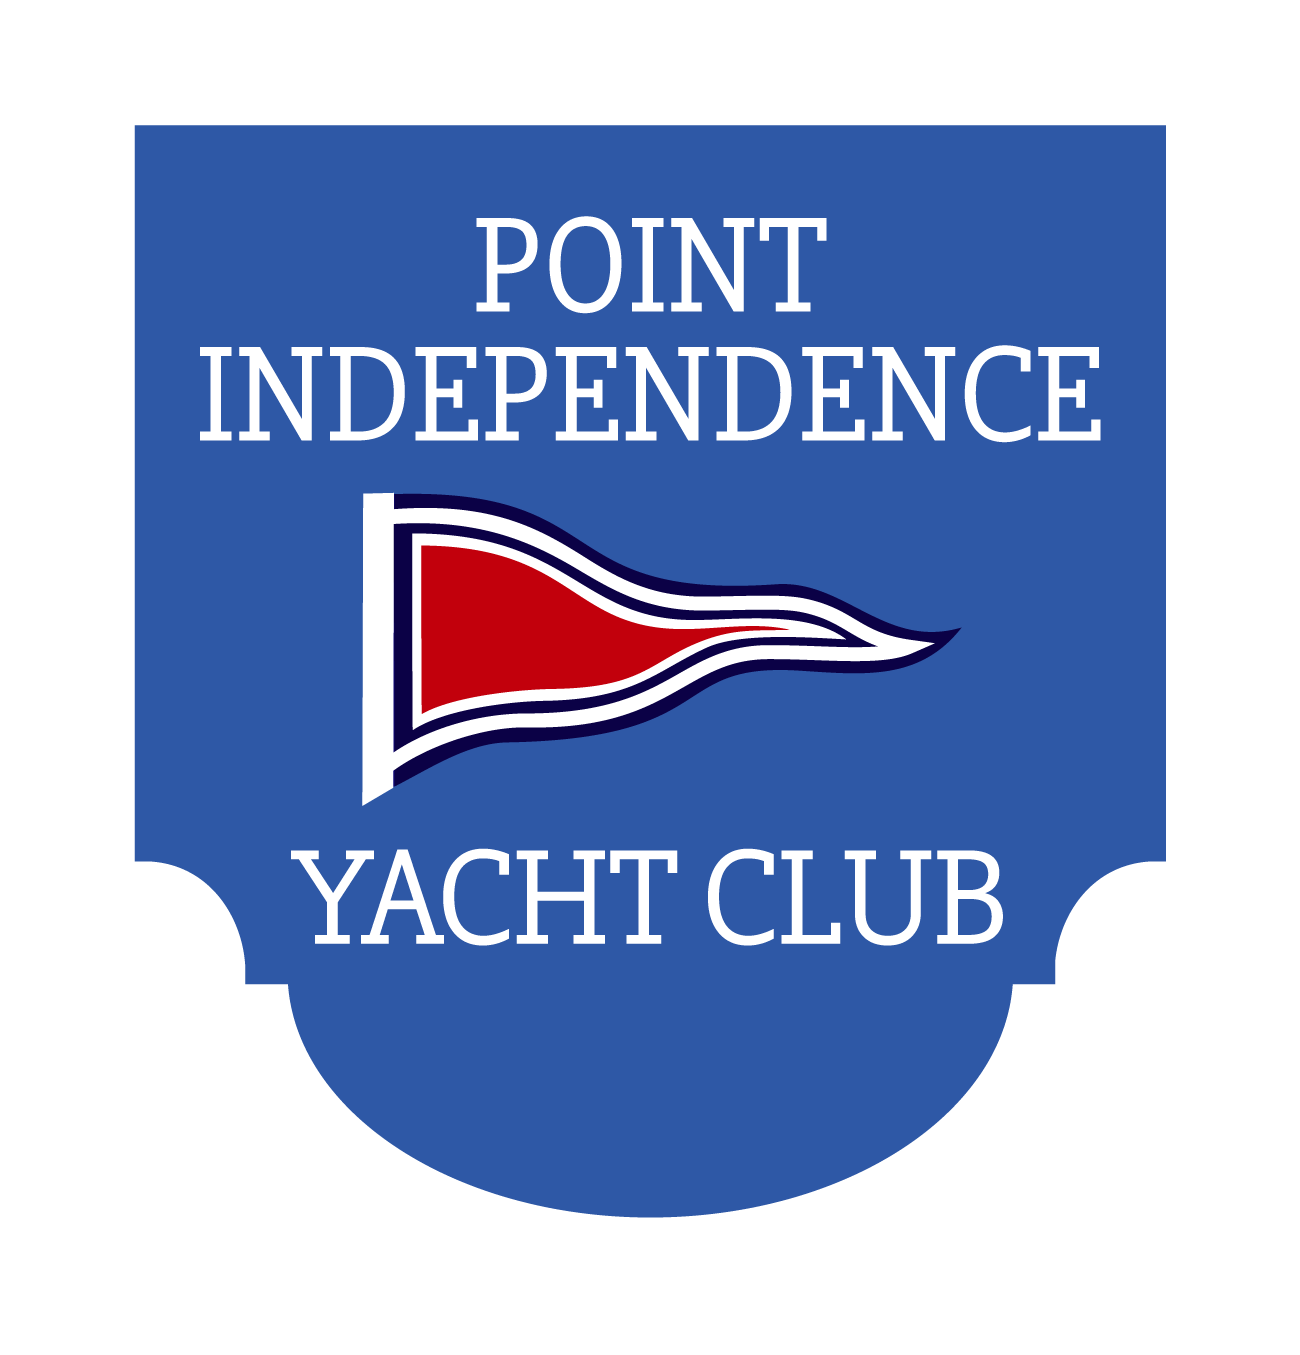 Point Independence Yacht Club